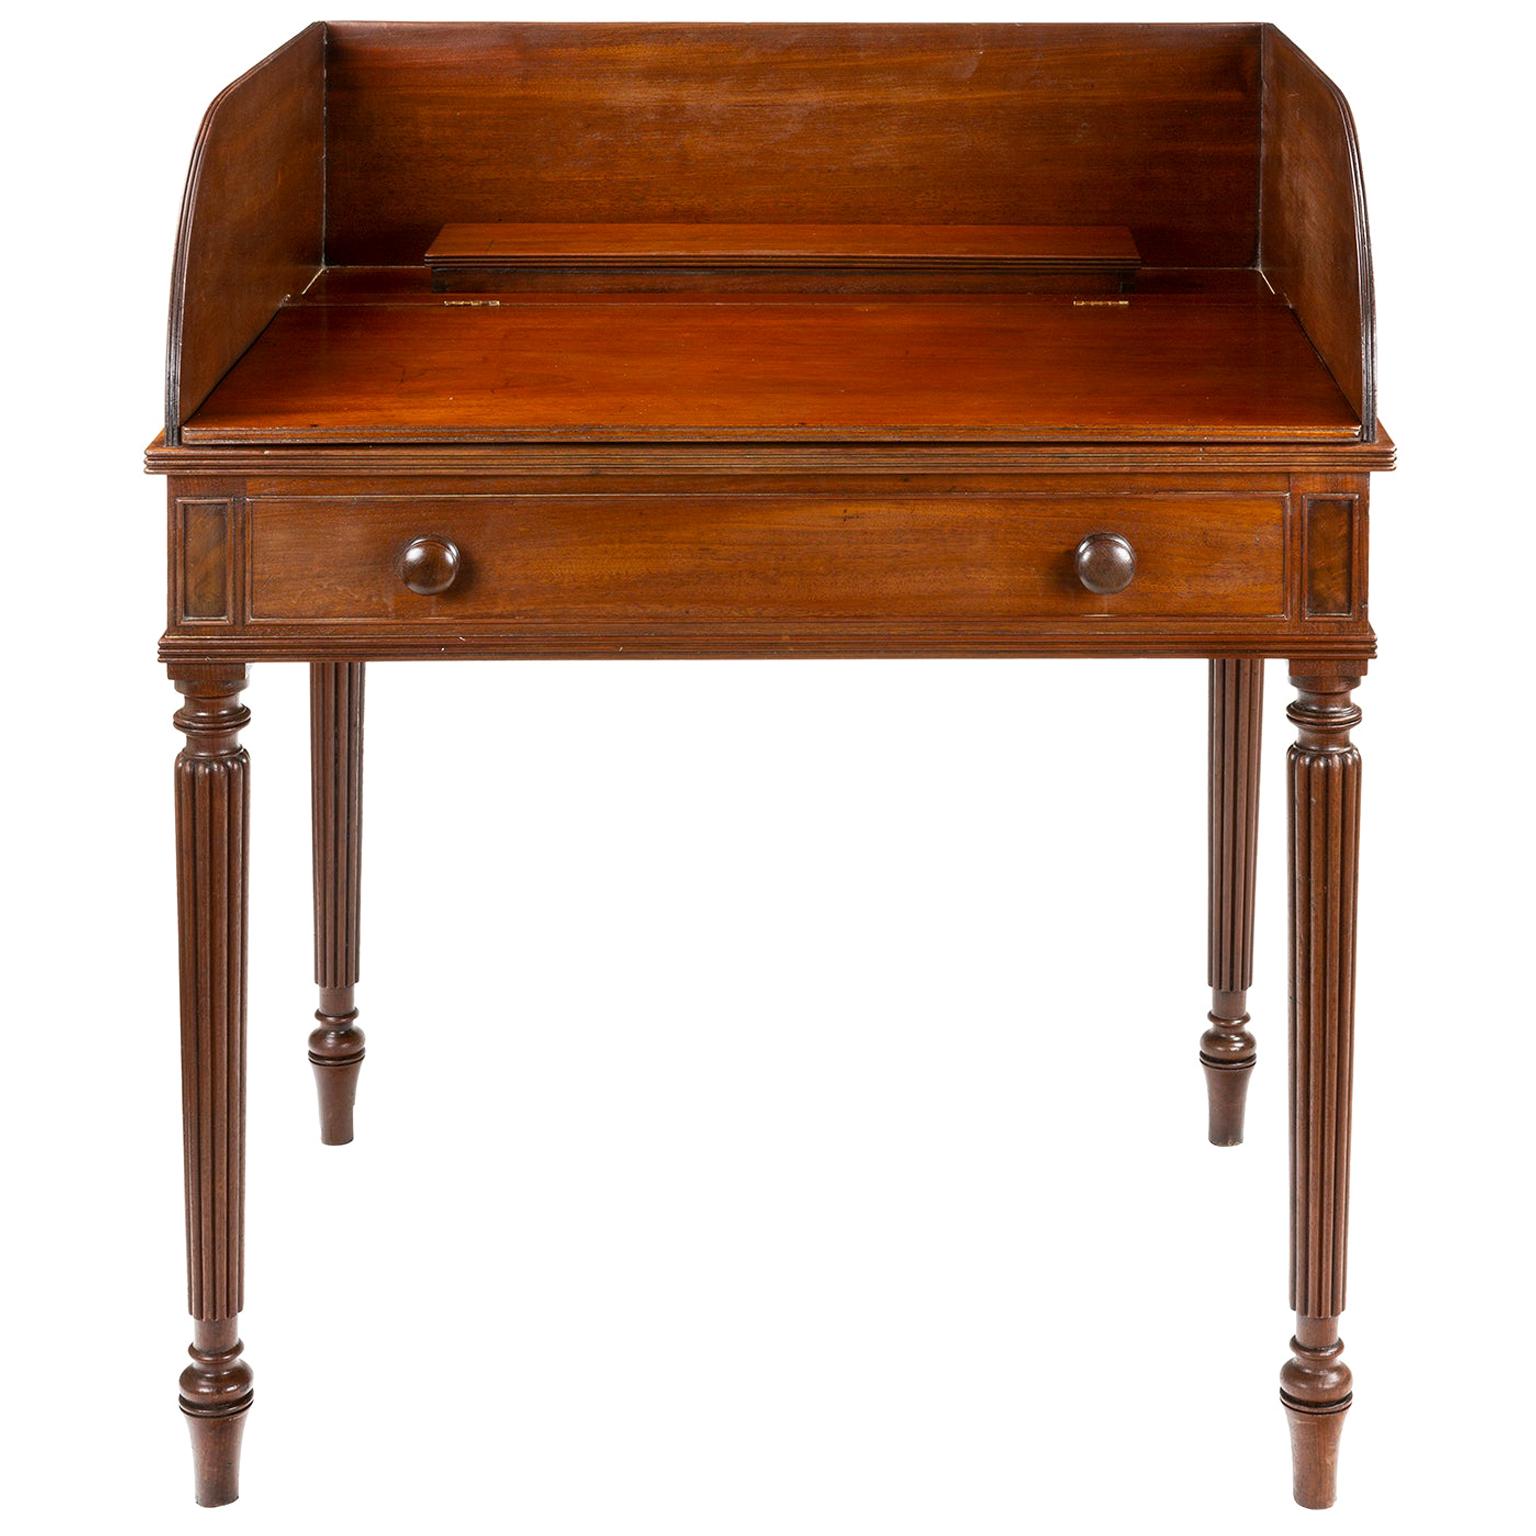 Regency Gillows wash stand / writing table in Mahogany